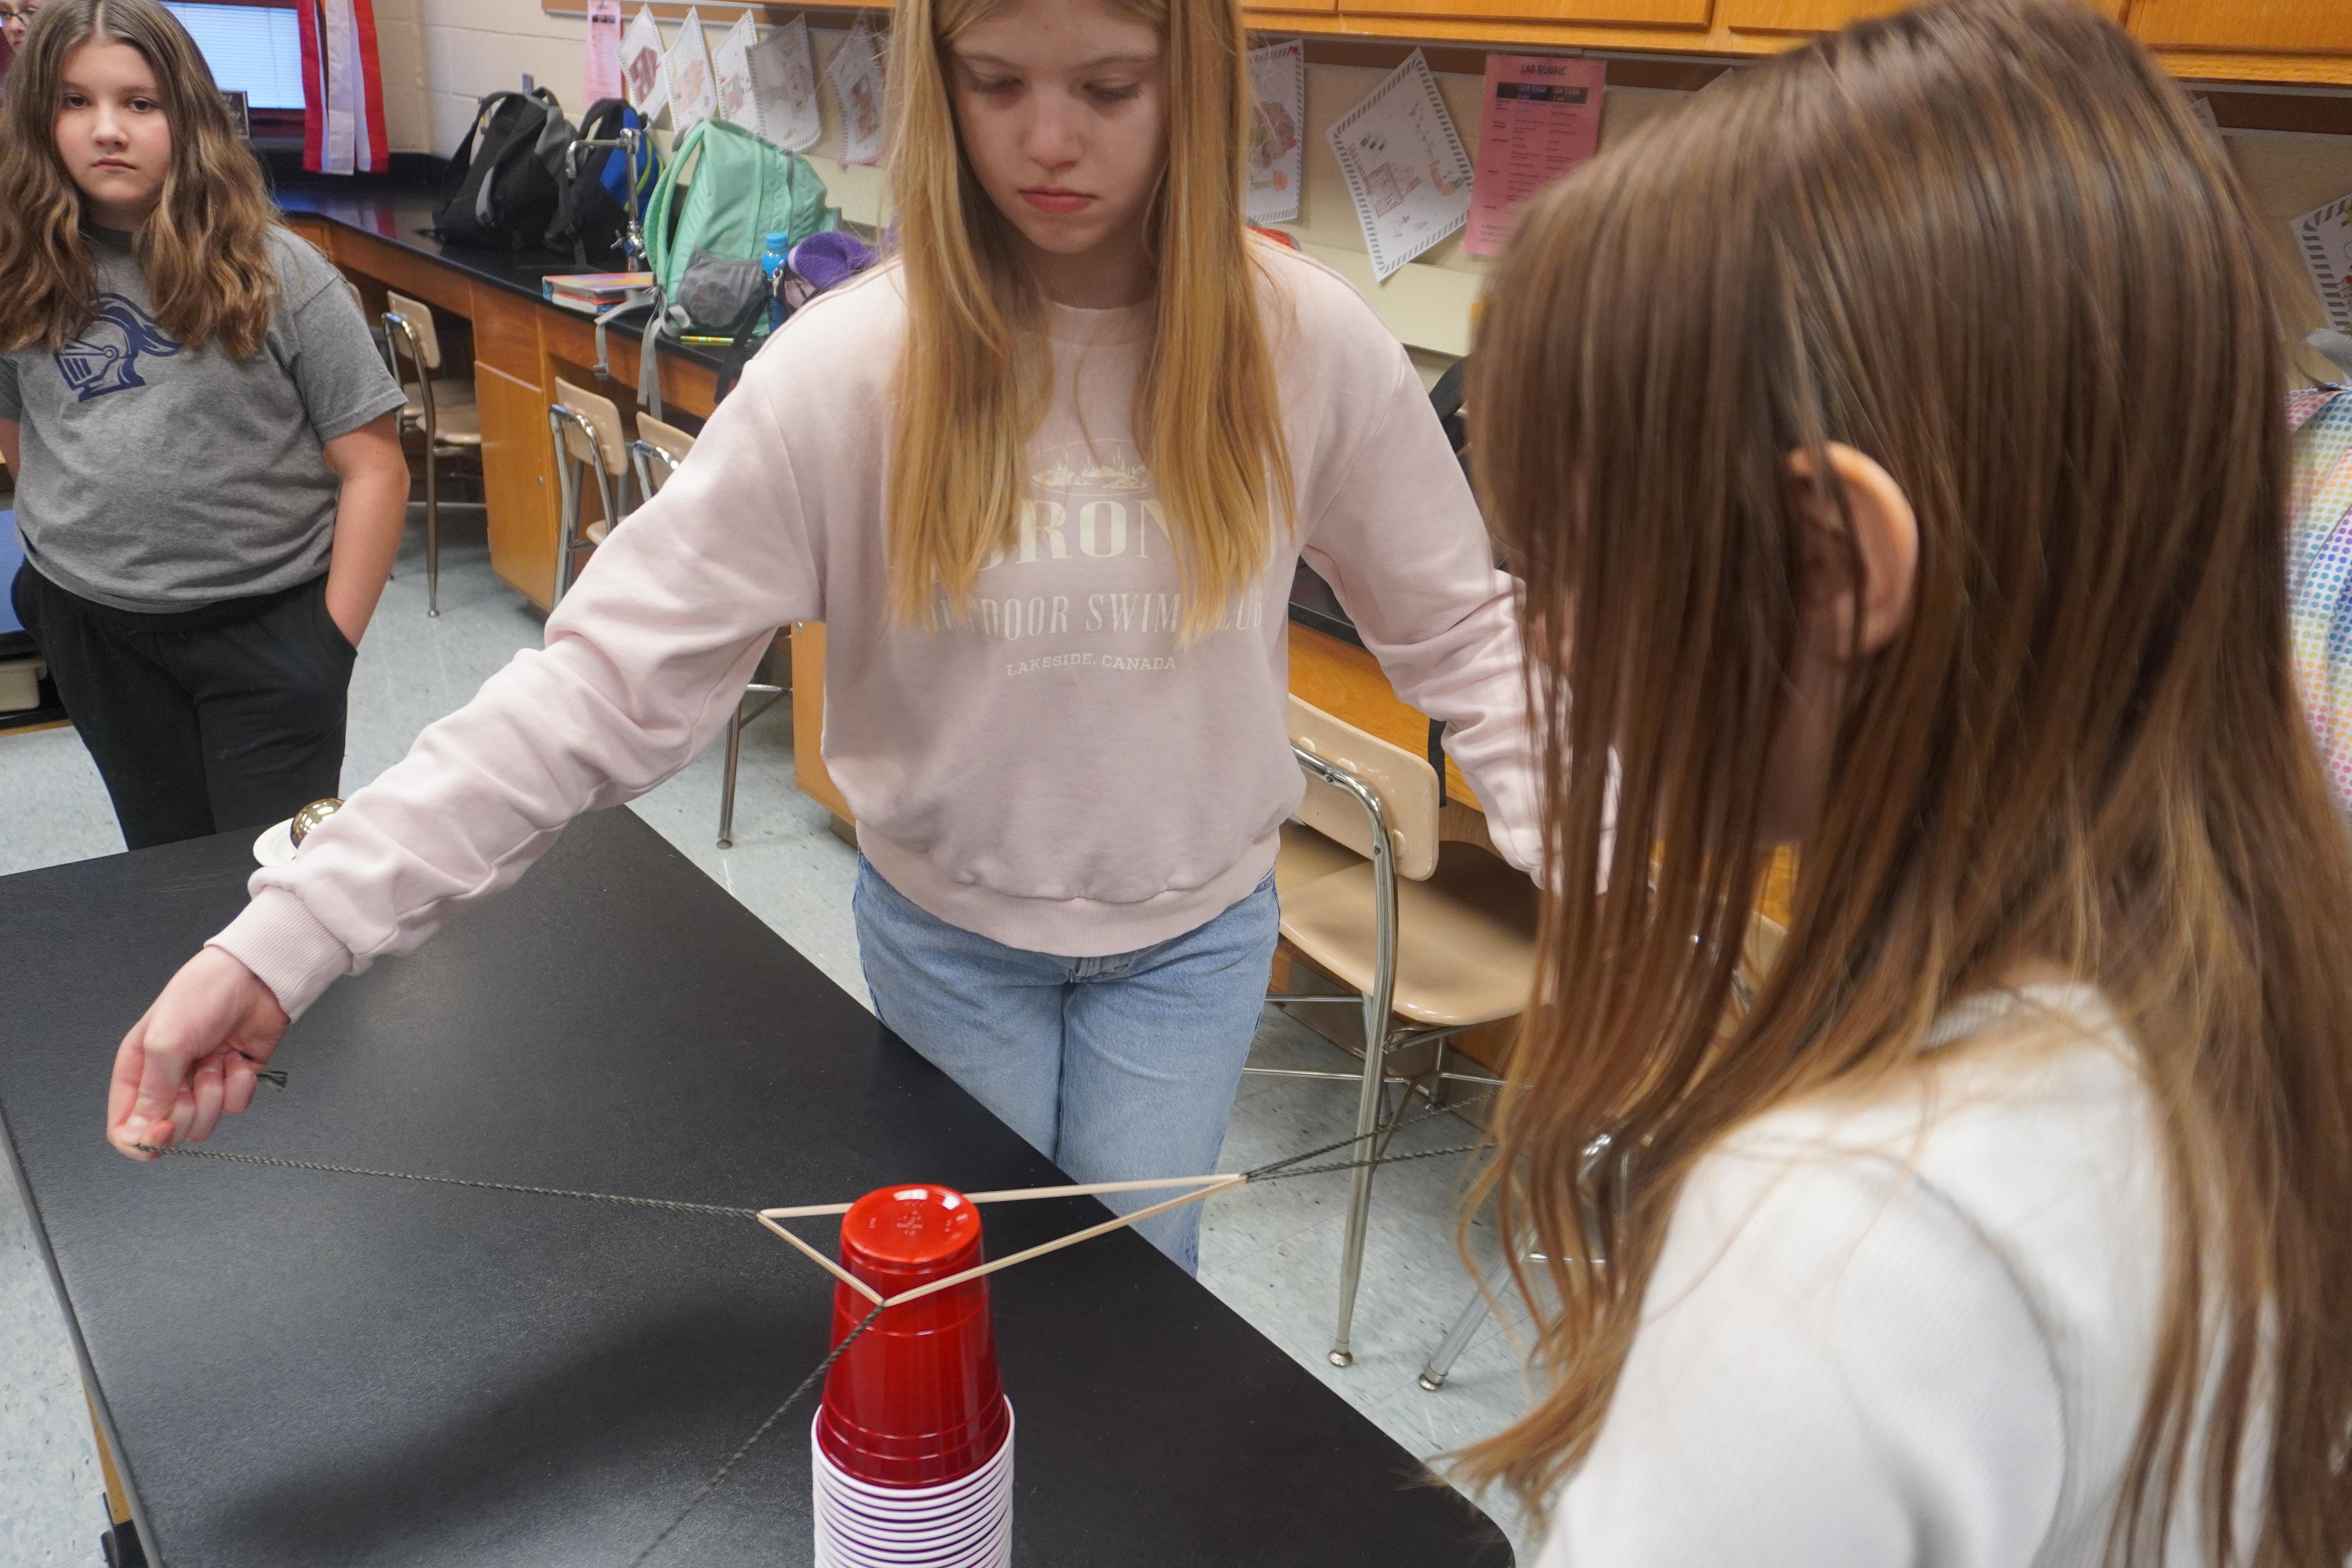 students using string to move cups